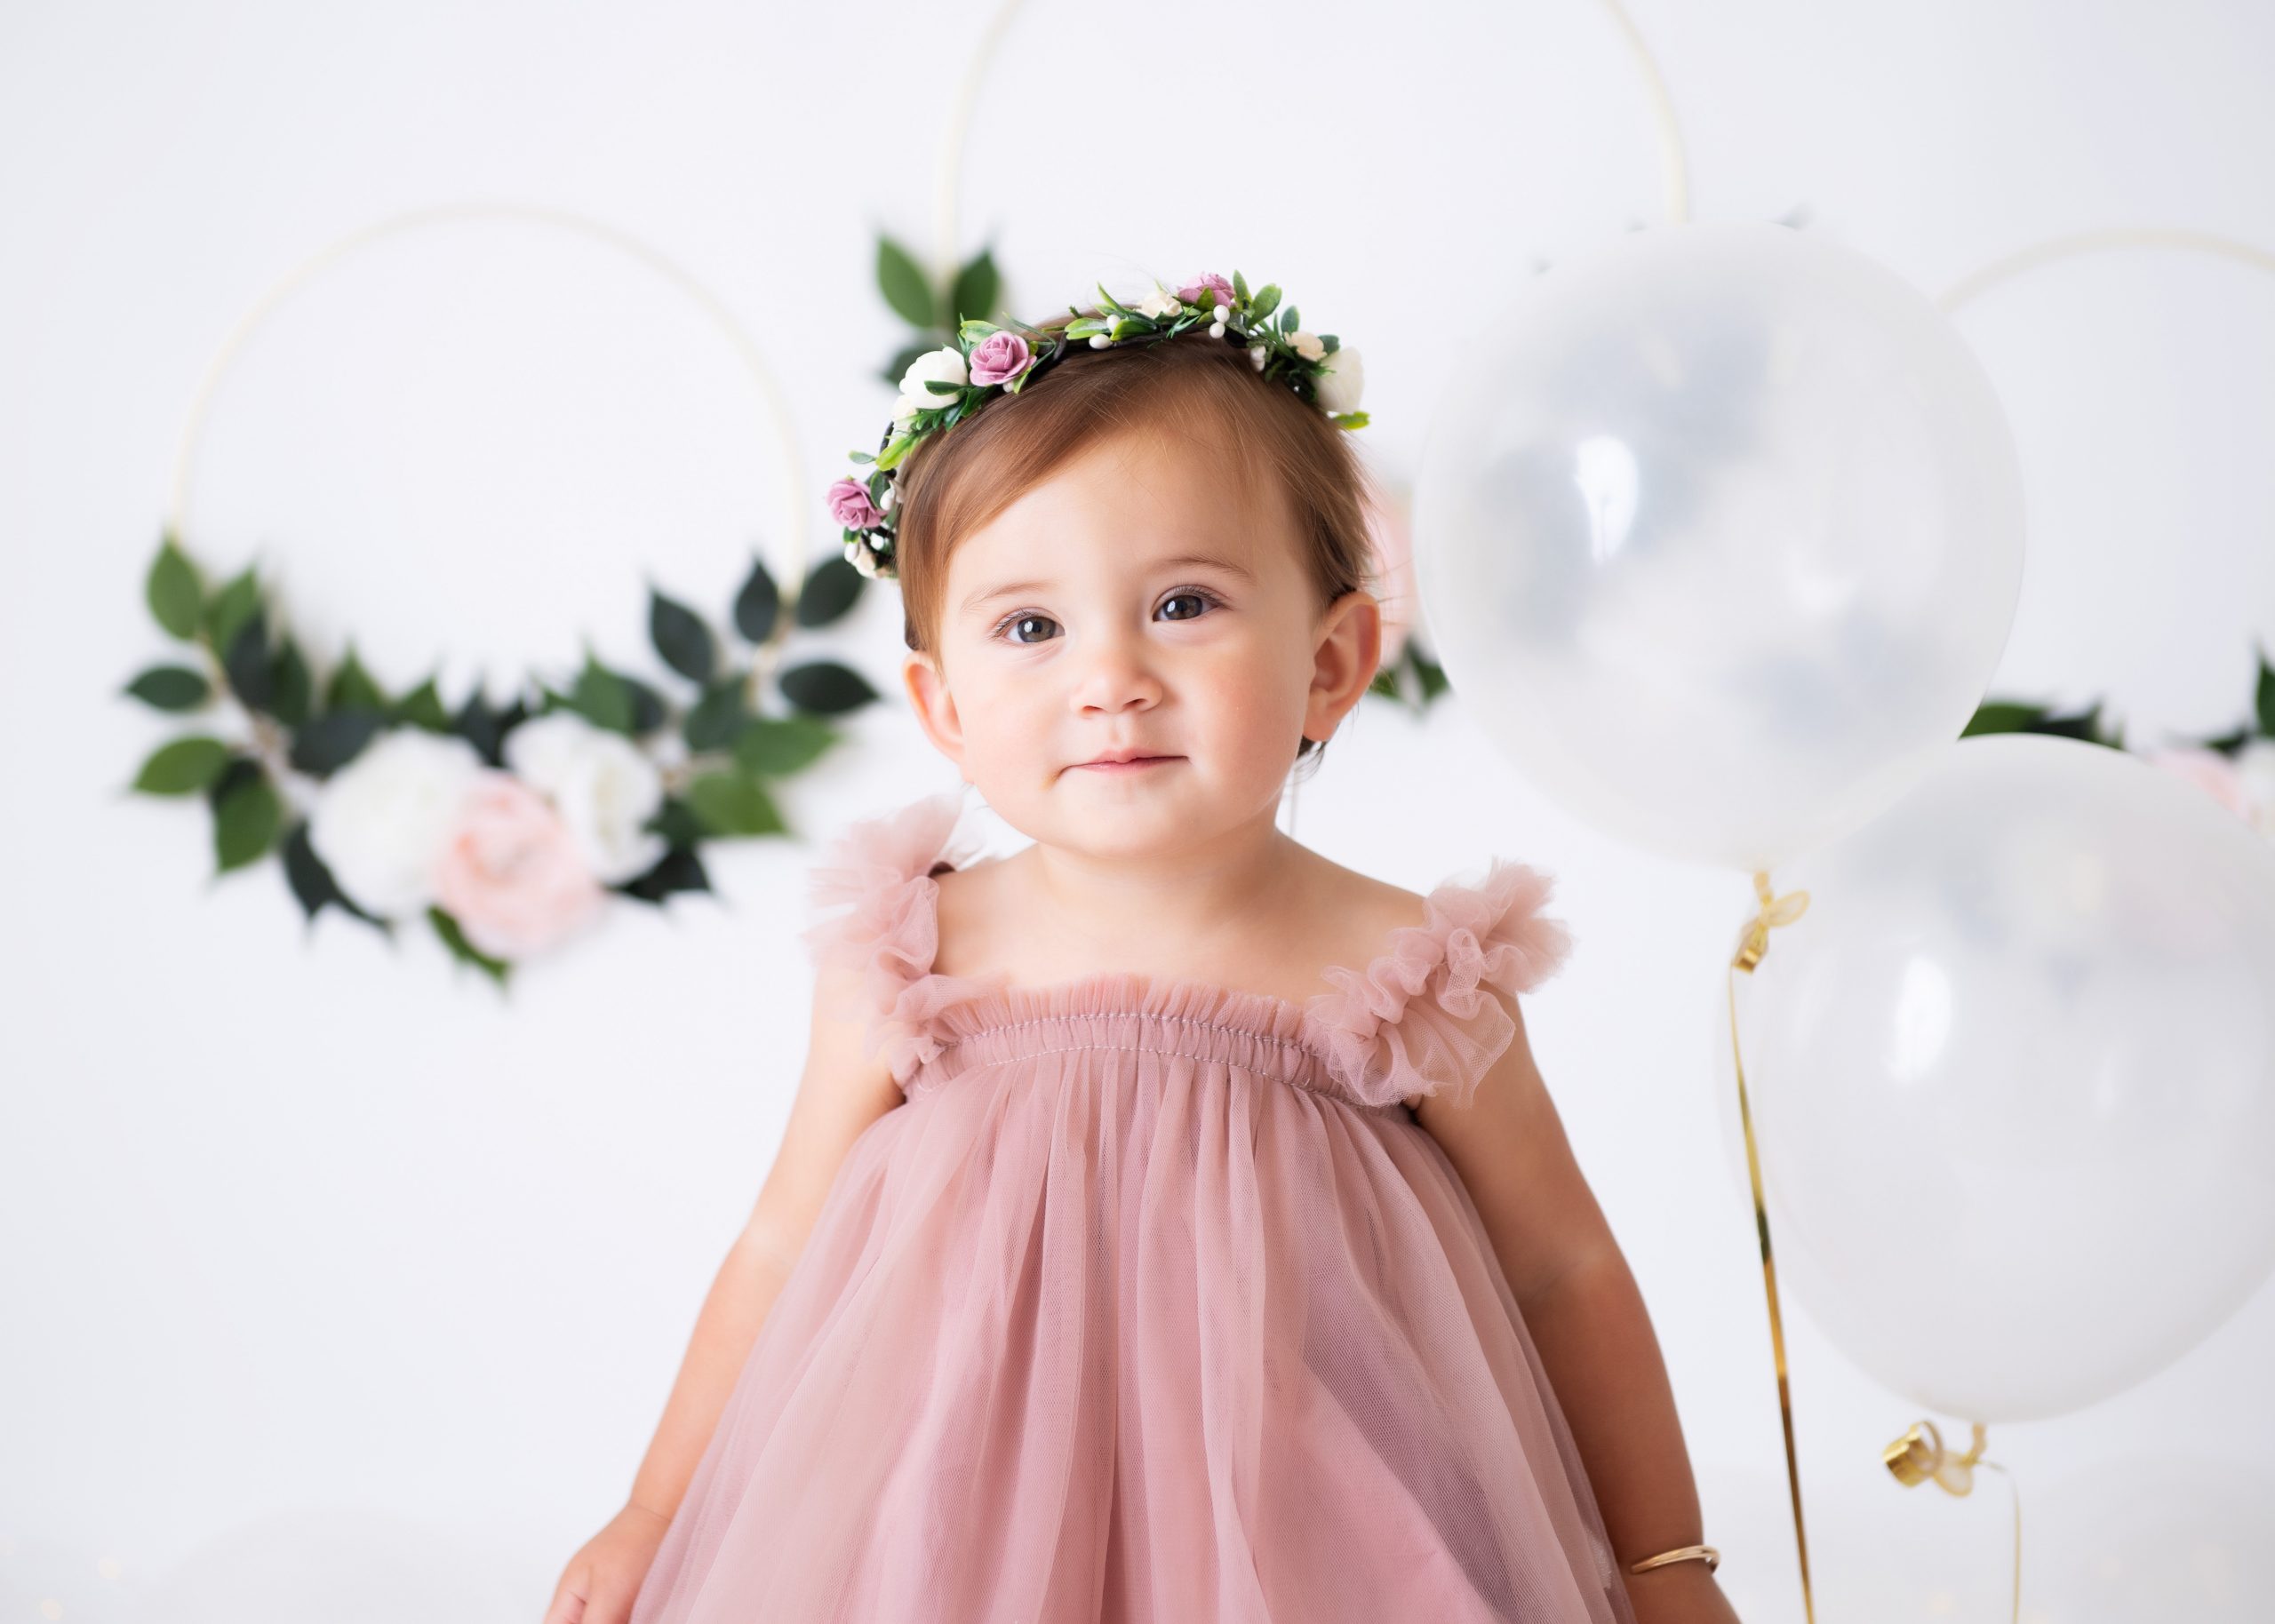 How to Find the Perfect Cake Smash Photographer for Your Baby's Big Day -  Calgary's #1 Newborn, Maternity, Cake Smash, and Family Photographer |  Amanda Dams Photography